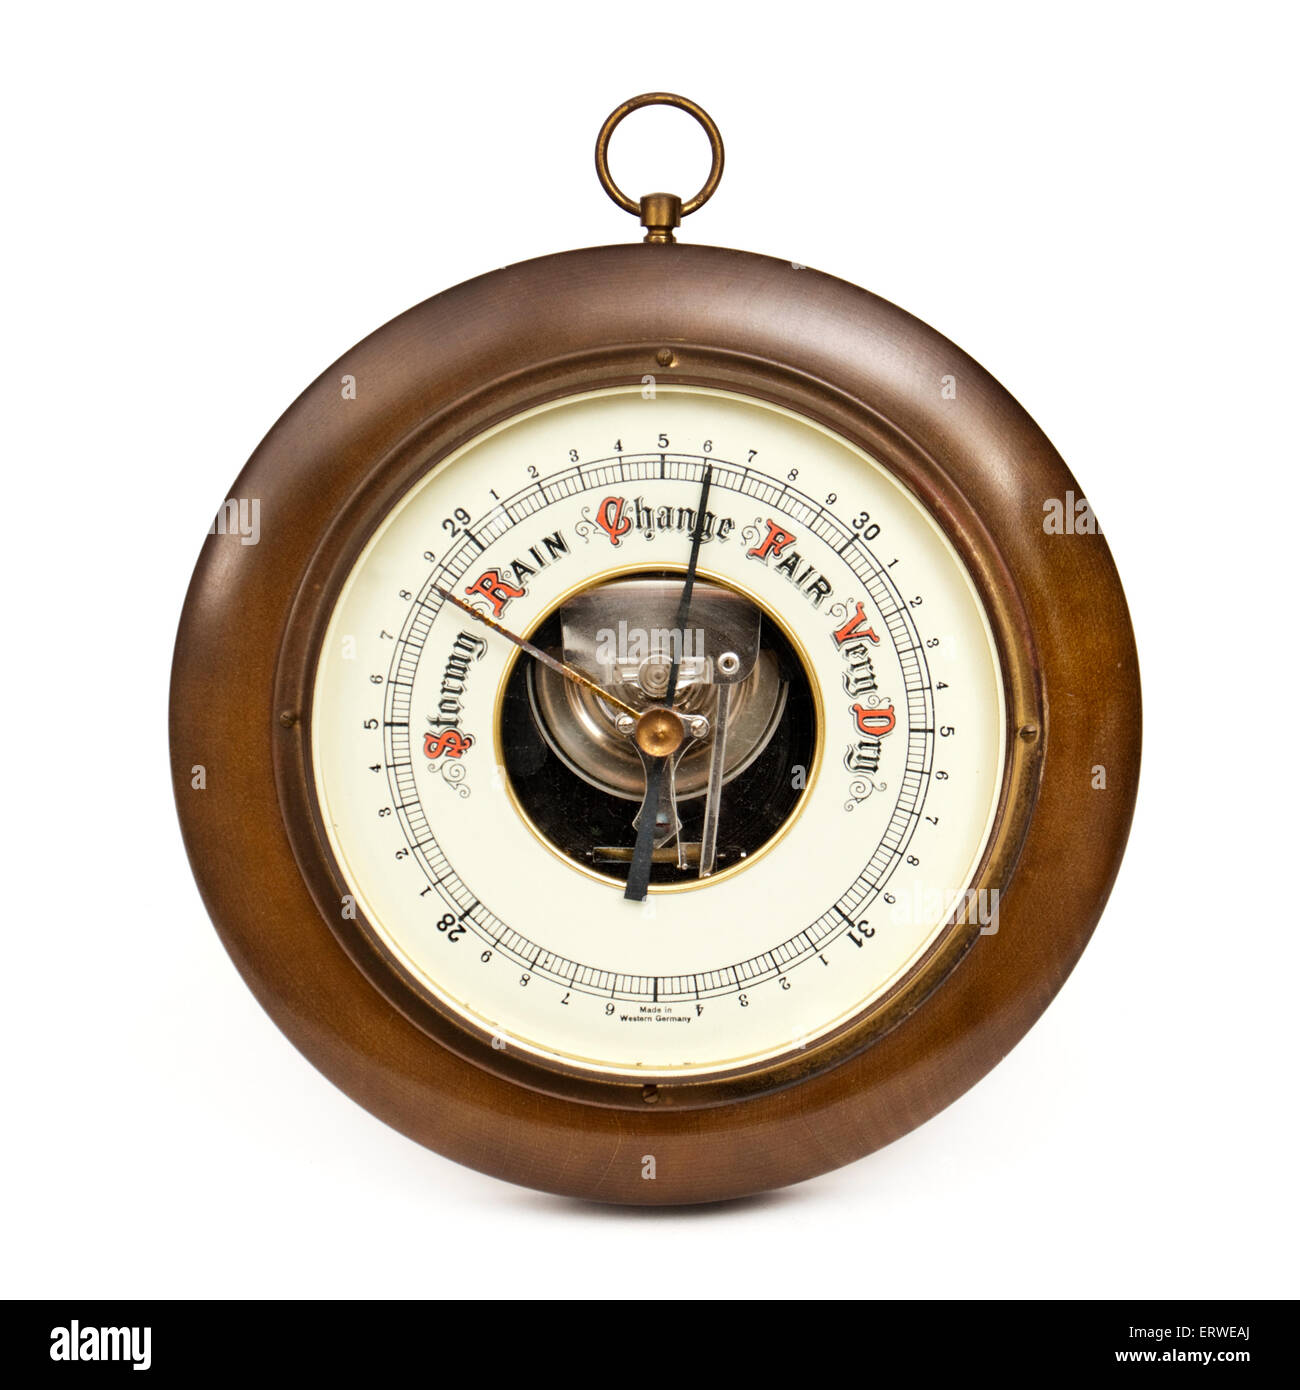 Vintage barometer, made in West Germany. Stock Photo